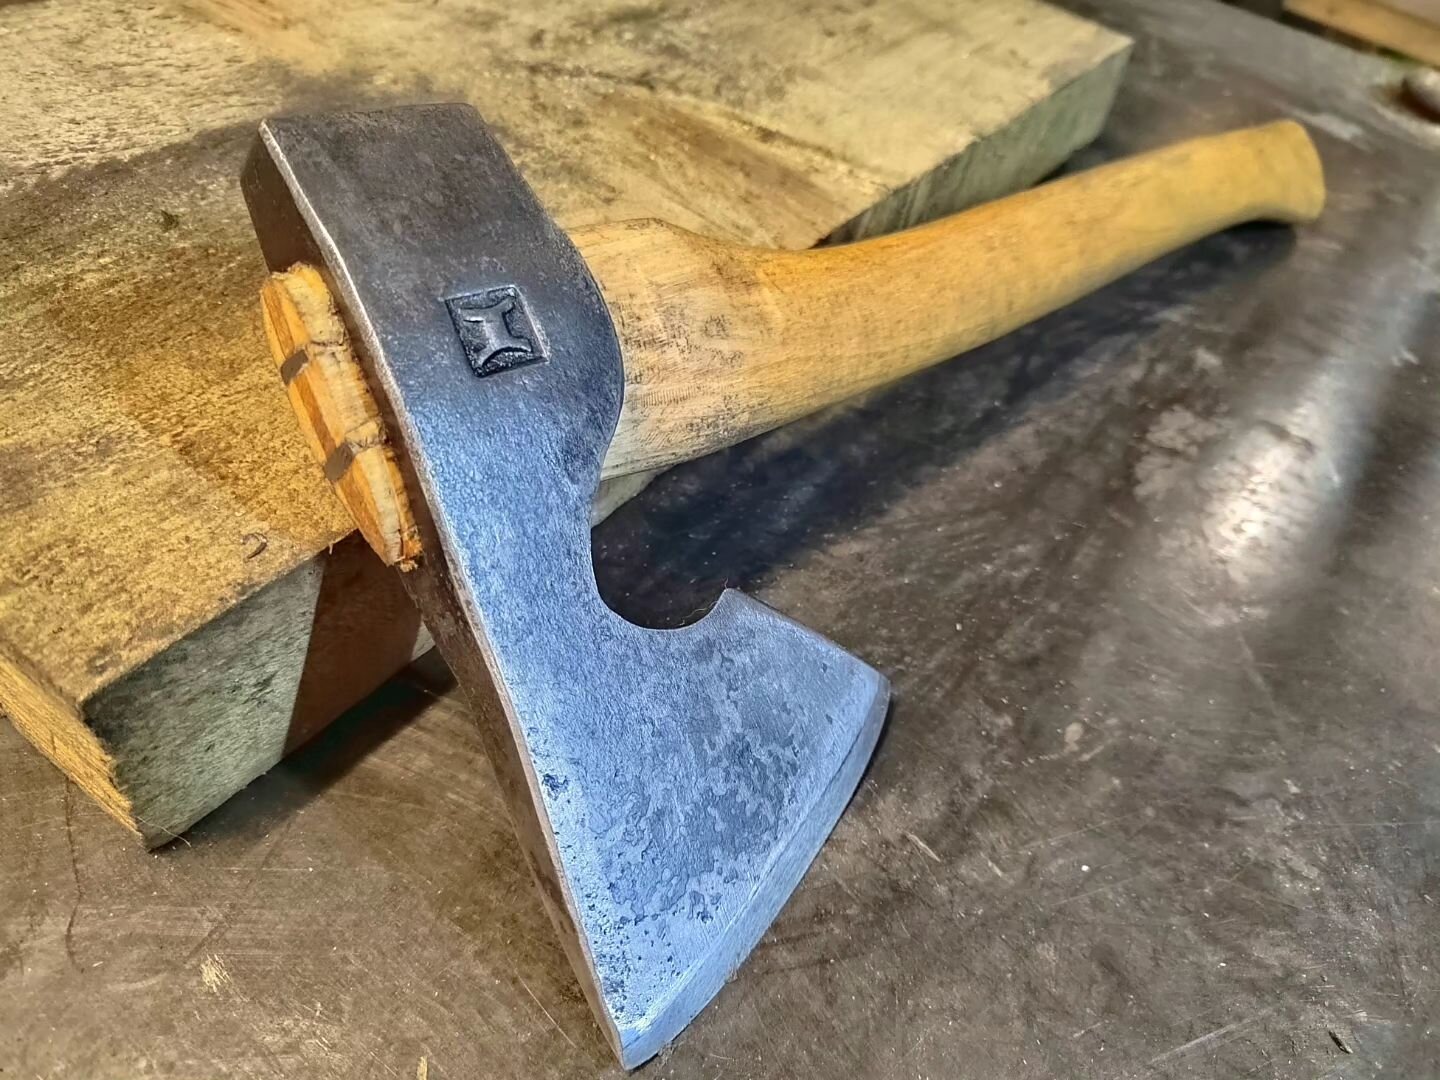 Here we have the test run pattern for our light forest axe.
Hand forged from En9 medium carbon steel, fitted with an 18 inch handle but would sit well on a 24 inch handle aswell.
This axe is designed to be  small and light enough to throw in a backpa